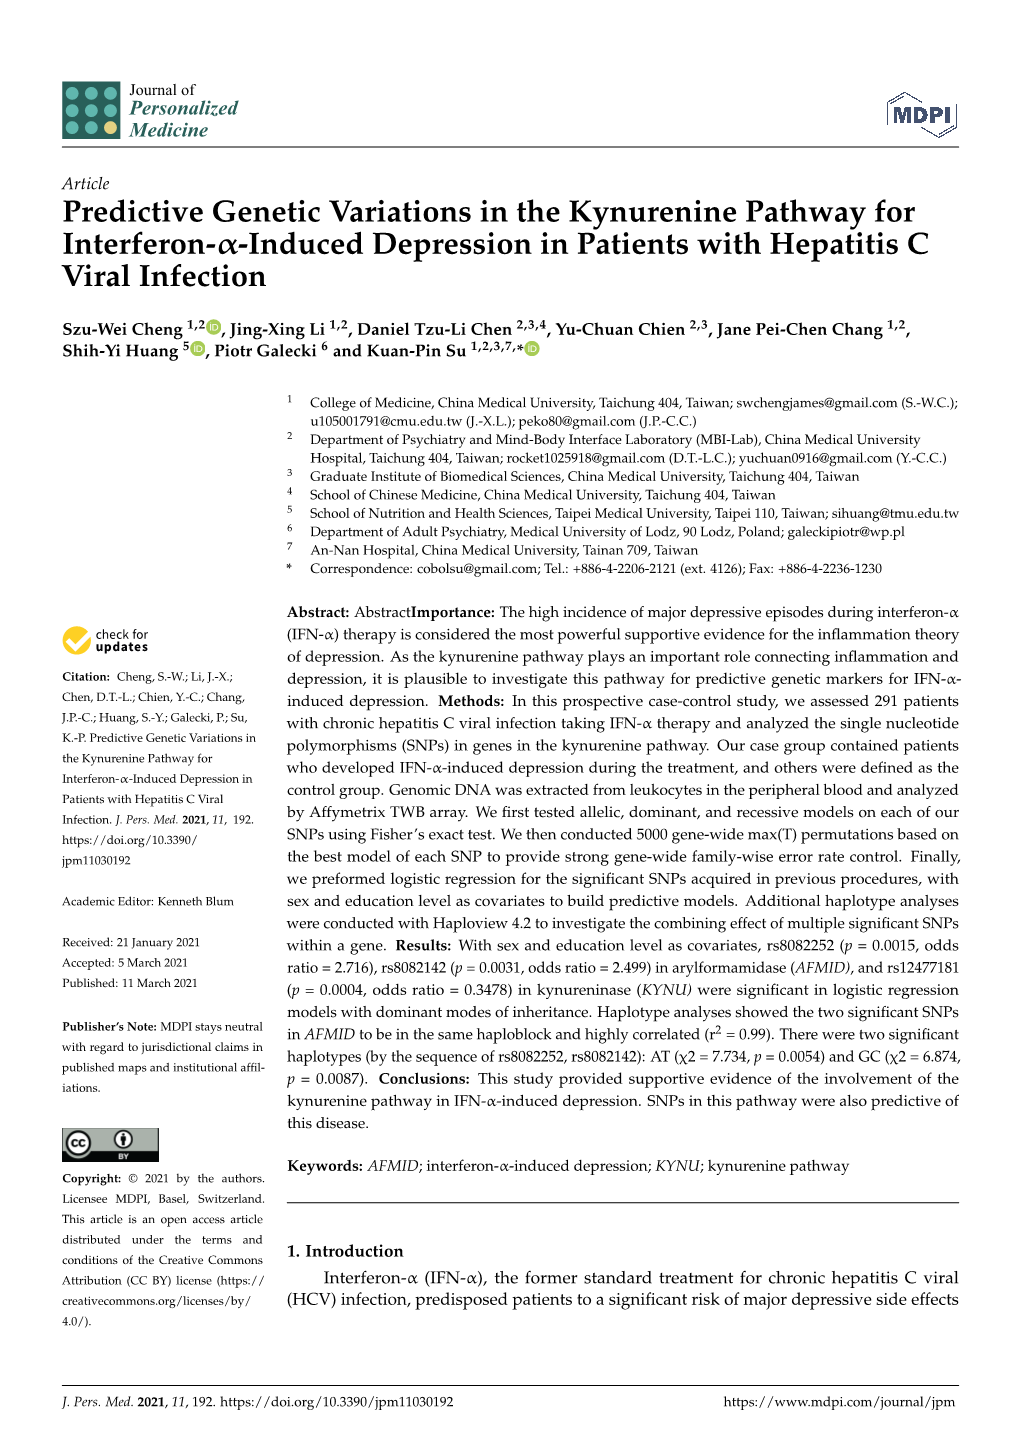 Predictive Genetic Variations in the Kynurenine Pathway for Interferon-Α-Induced Depression in Patients with Hepatitis C Viral Infection